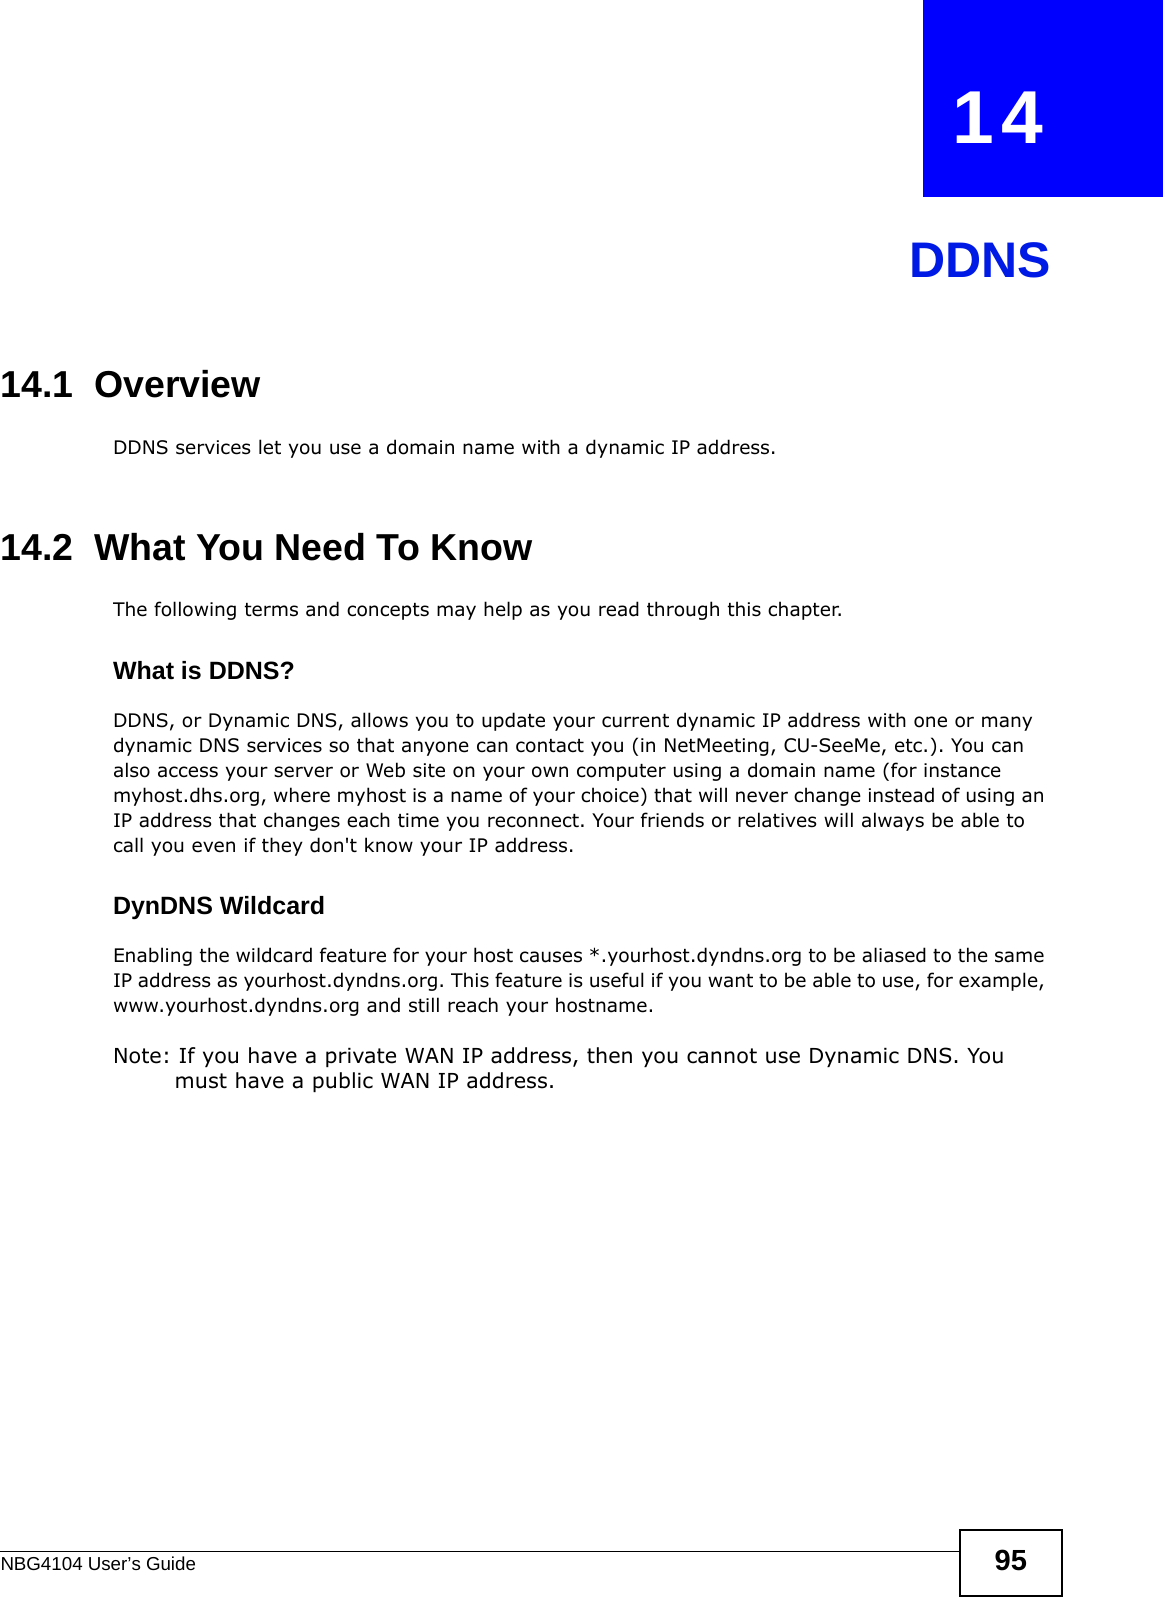 NBG4104 User’s Guide 95CHAPTER   14DDNS14.1  Overview DDNS services let you use a domain name with a dynamic IP address.14.2  What You Need To KnowThe following terms and concepts may help as you read through this chapter.What is DDNS?DDNS, or Dynamic DNS, allows you to update your current dynamic IP address with one or many dynamic DNS services so that anyone can contact you (in NetMeeting, CU-SeeMe, etc.). You can also access your server or Web site on your own computer using a domain name (for instance myhost.dhs.org, where myhost is a name of your choice) that will never change instead of using an IP address that changes each time you reconnect. Your friends or relatives will always be able to call you even if they don&apos;t know your IP address.DynDNS Wildcard Enabling the wildcard feature for your host causes *.yourhost.dyndns.org to be aliased to the same IP address as yourhost.dyndns.org. This feature is useful if you want to be able to use, for example, www.yourhost.dyndns.org and still reach your hostname.Note: If you have a private WAN IP address, then you cannot use Dynamic DNS. You must have a public WAN IP address.